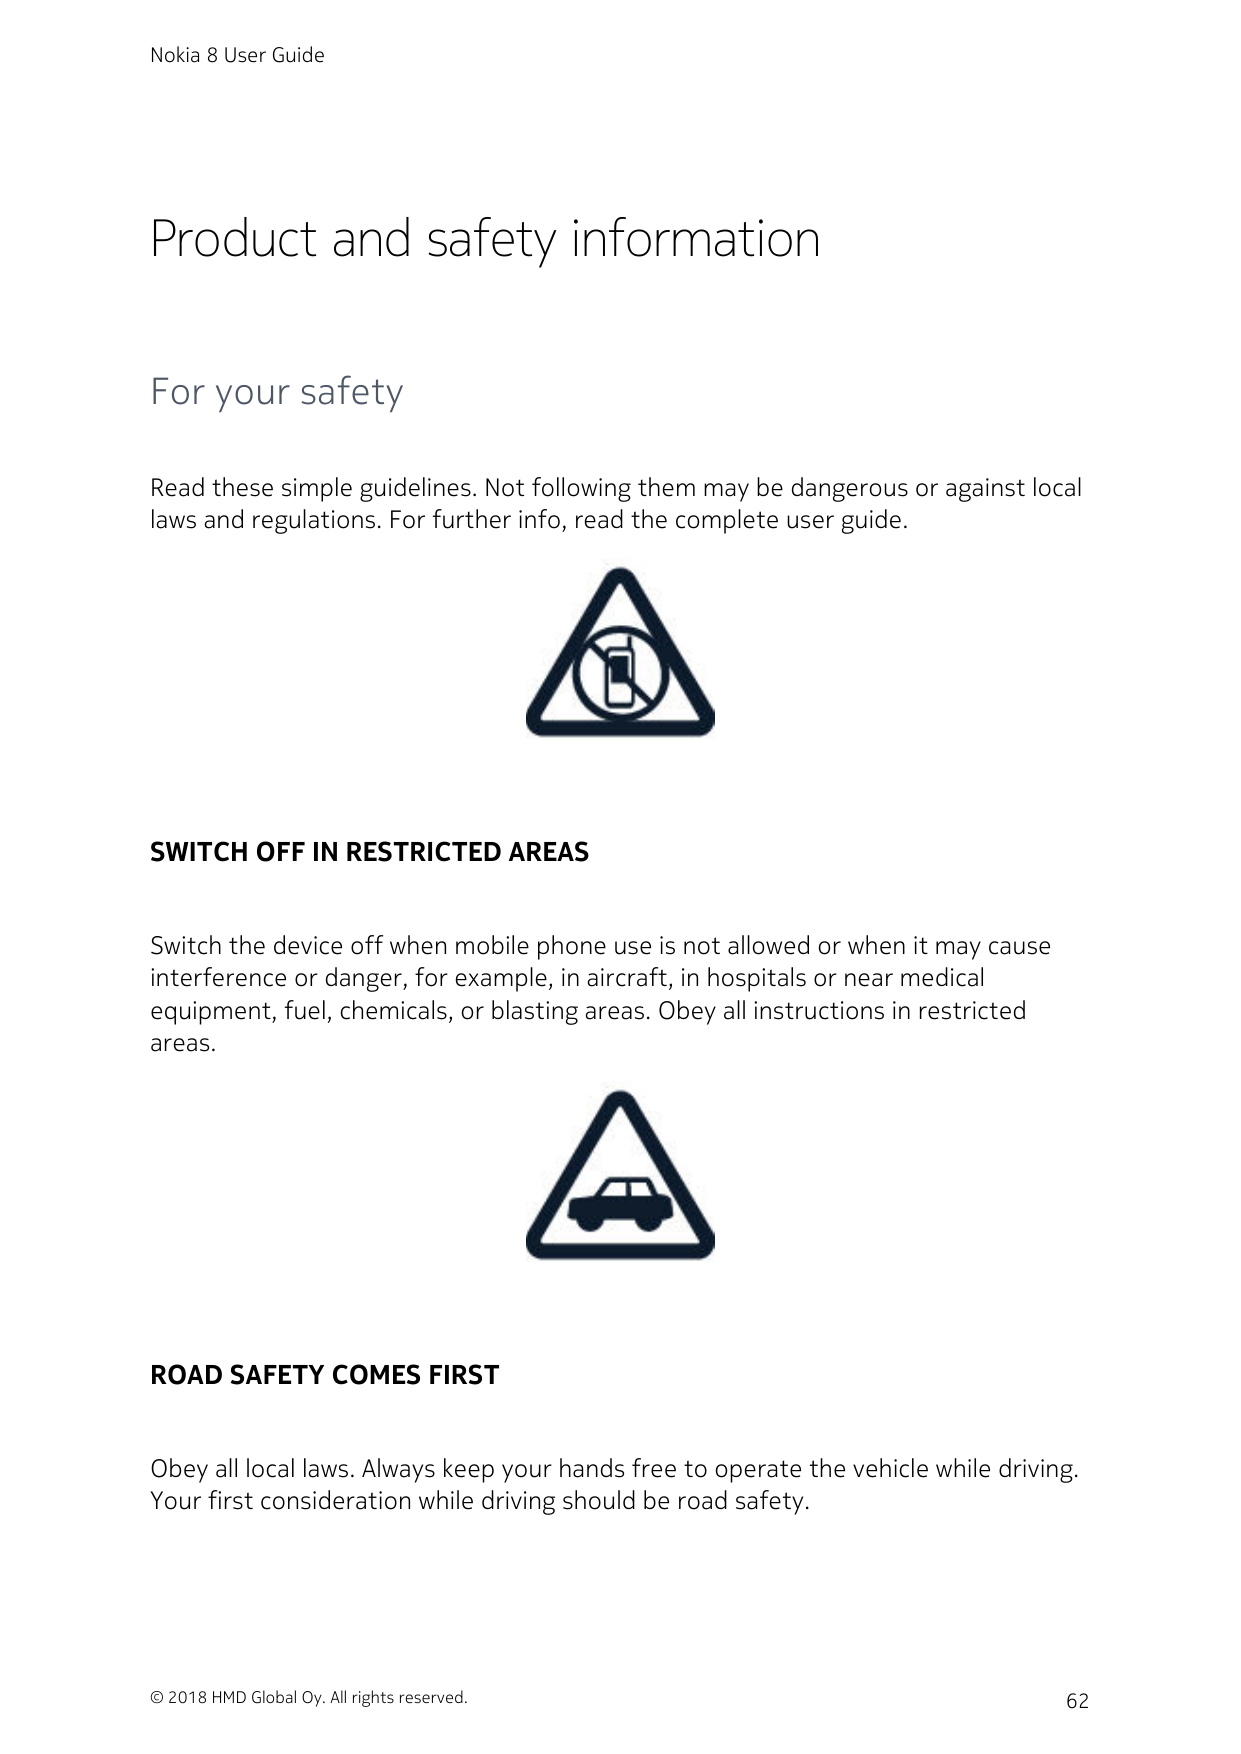 Nokia 8 User GuideProduct and safety informationFor your safetyRead these simple guidelines. Not following them may be dangerous